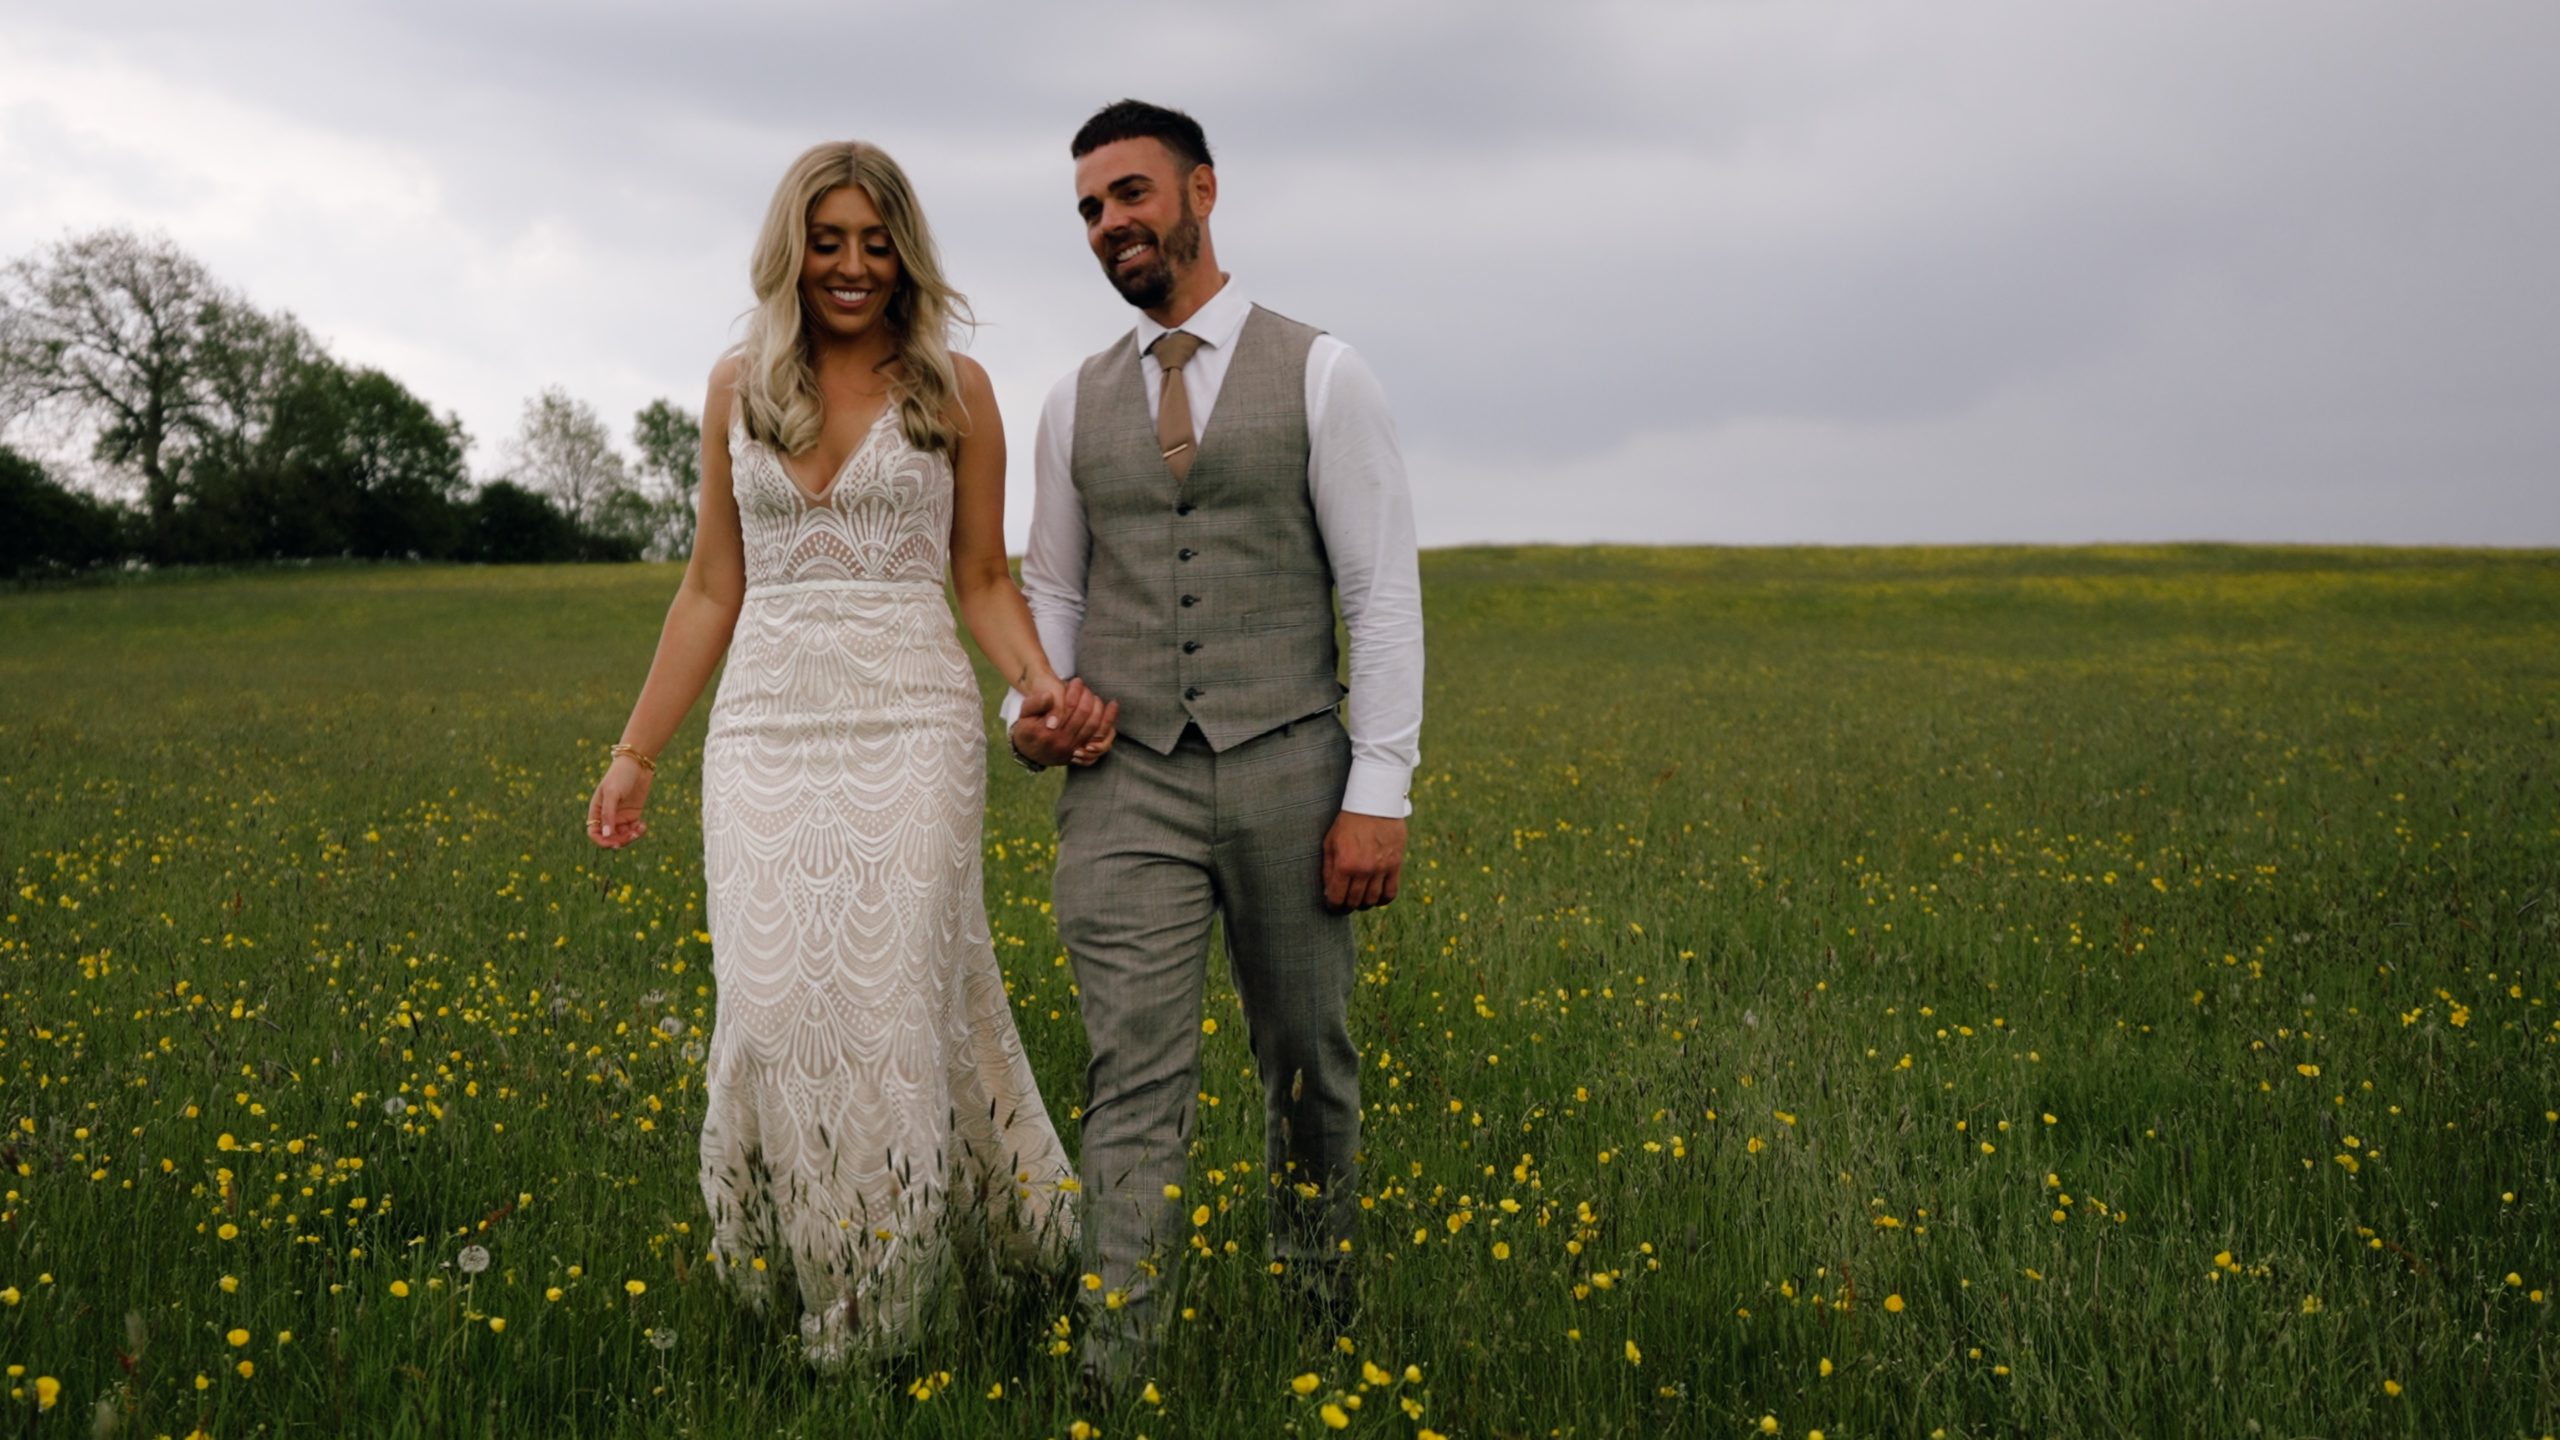 Wedding videography and photography at Eden Barn